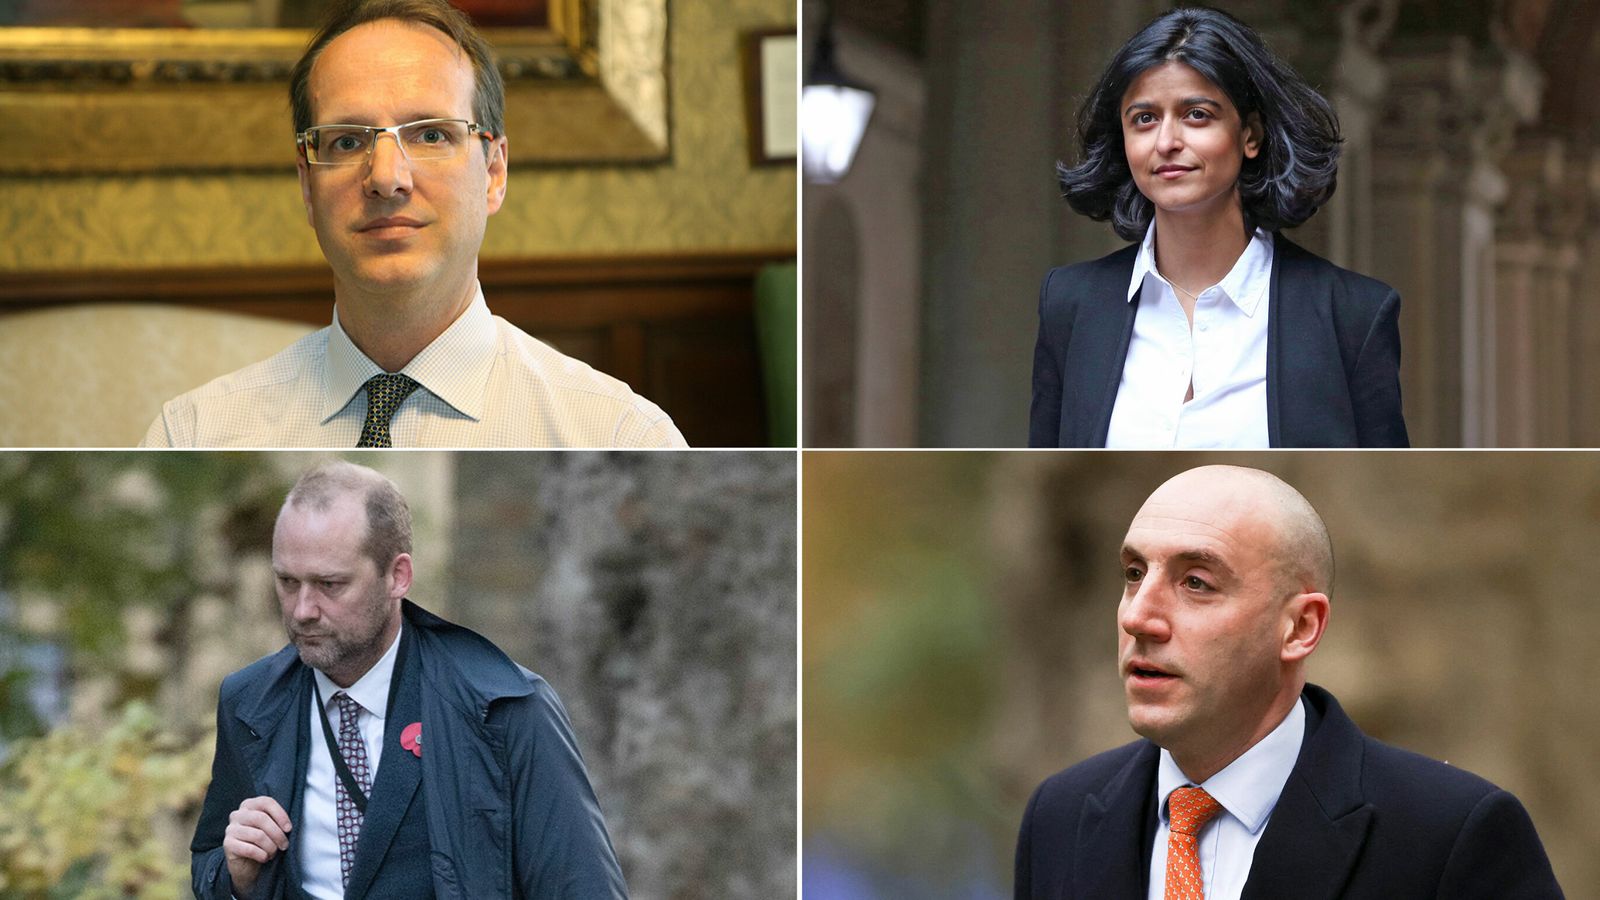 Director of Communications Jack Doyle Policy Head Munira Mirza, Chief of Staff Dan Rosenfield, and Johnson’s principal private secretary Martin Reynolds resigned from their positions.